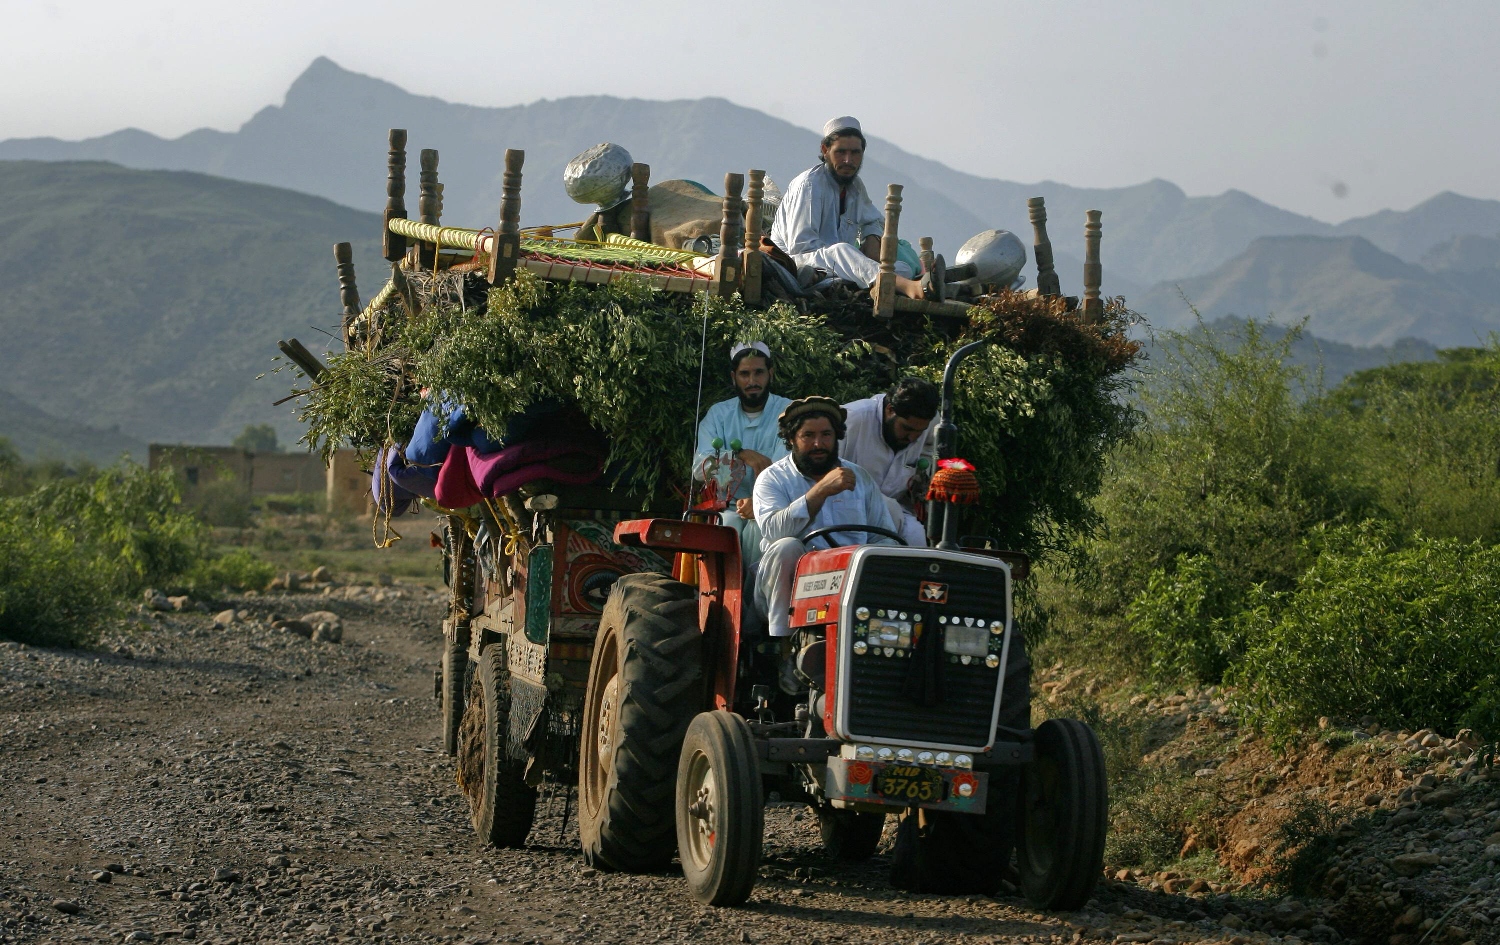 an internally displaced family flee military operations on tractors in tora warai a town in kurram agency located in pakistan 039 s federally administered tribal areas fata during a military trip organised for media along the afghanistan border july 9 2011 photo reuters